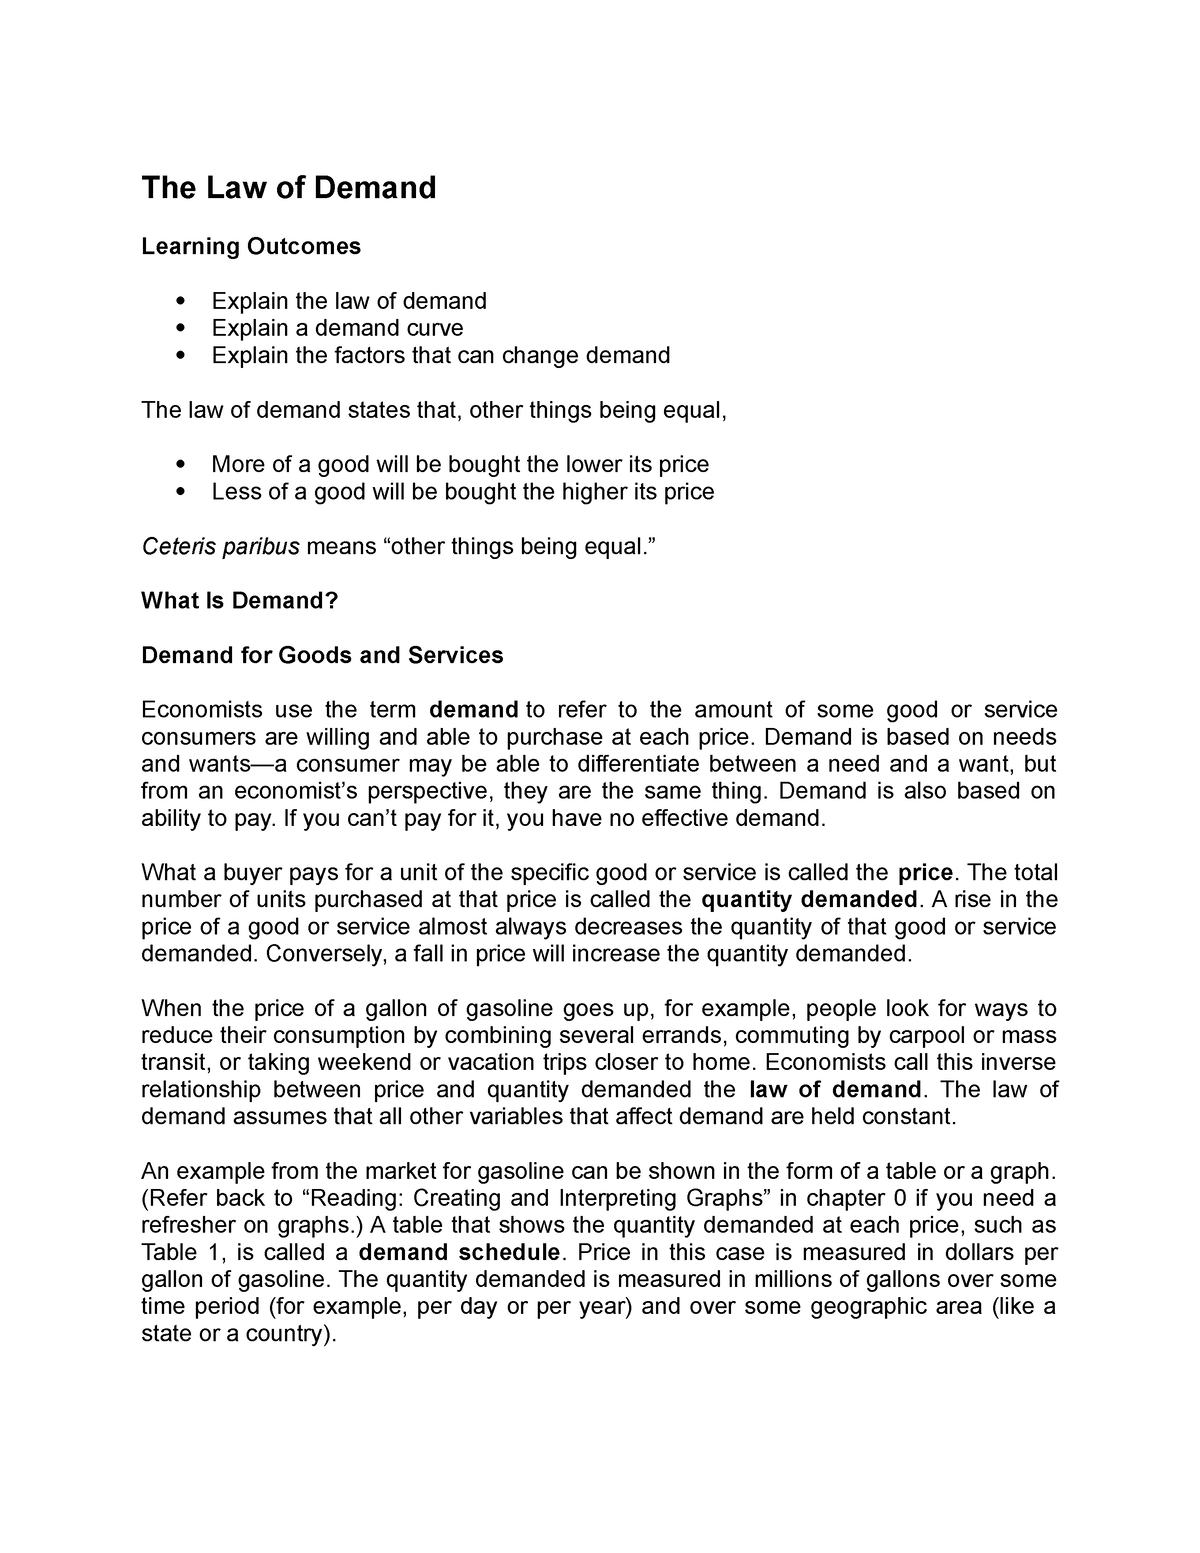 law of demand assignment conclusion